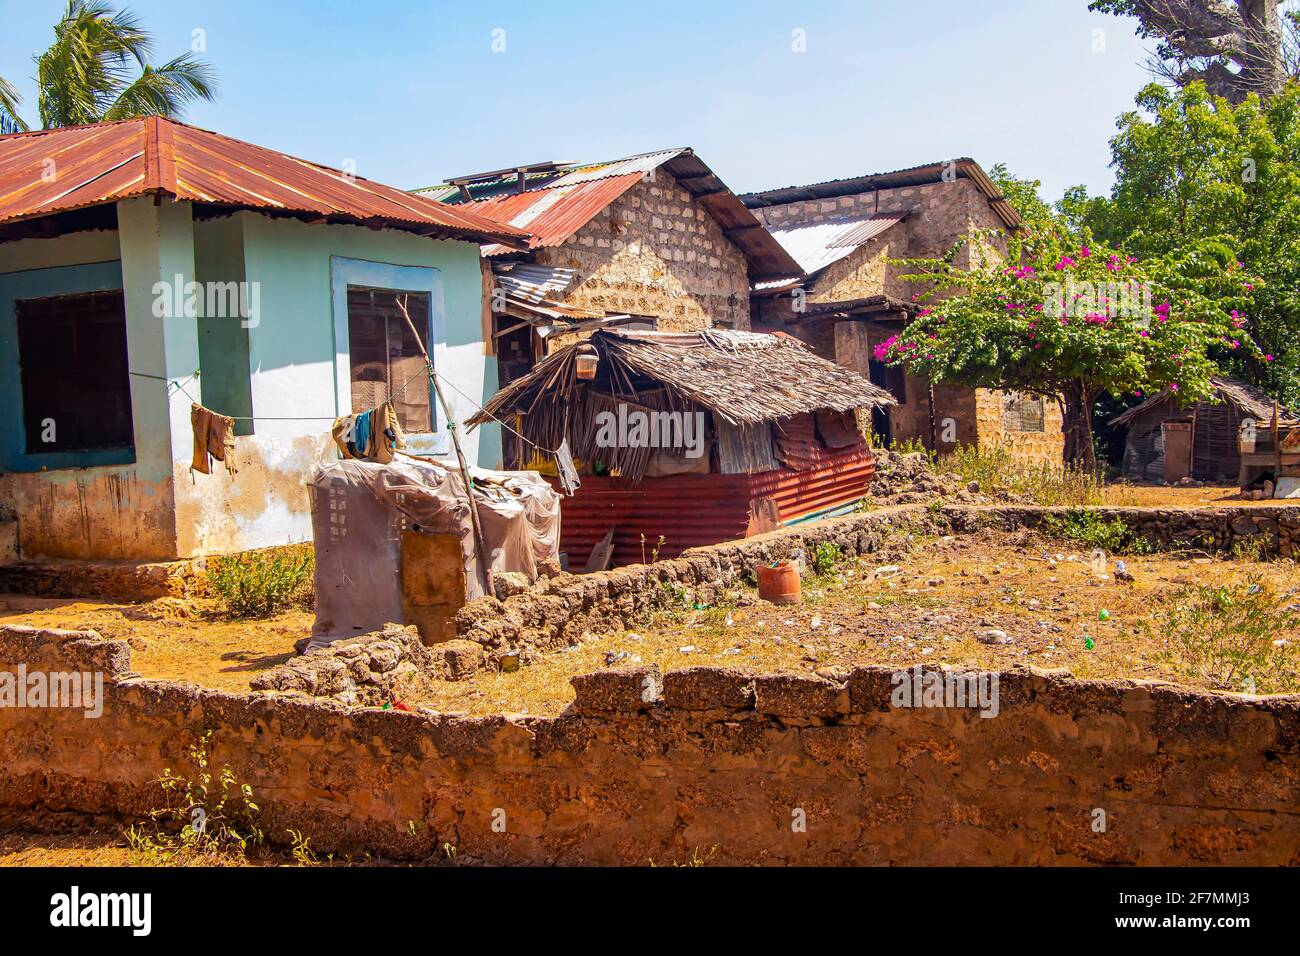 Typical stone houses in an African village on Wasini island. It is a small village in Kenya. Stock Photo